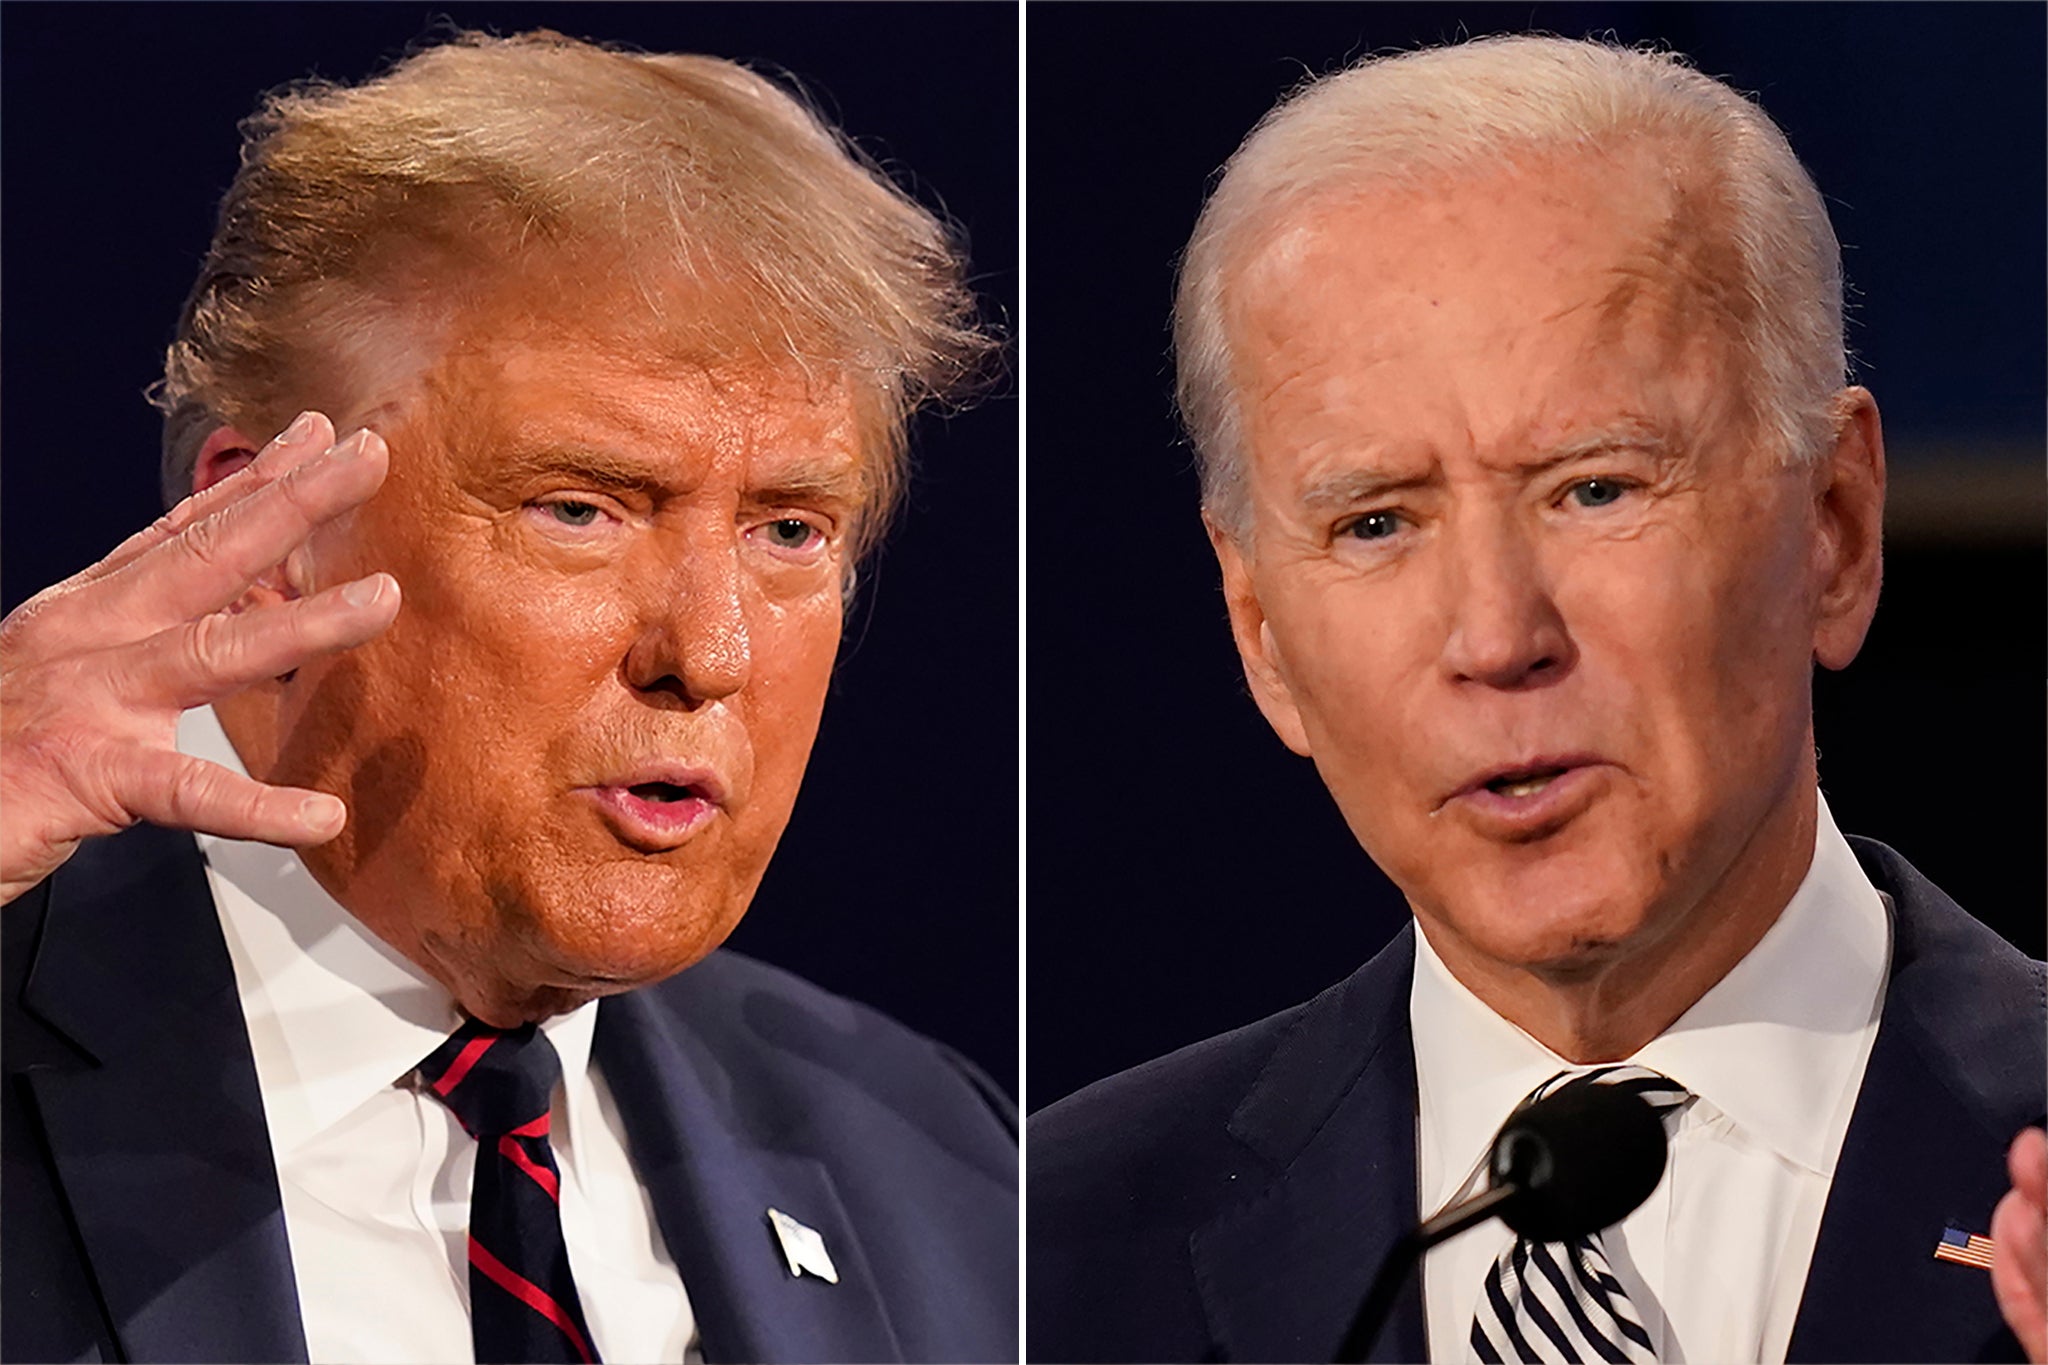 This combination of photos show President Donald Trump, left, and former Vice President Joe Biden during the first presidential debate on Sept. 29, 2020, in Cleveland, Ohio